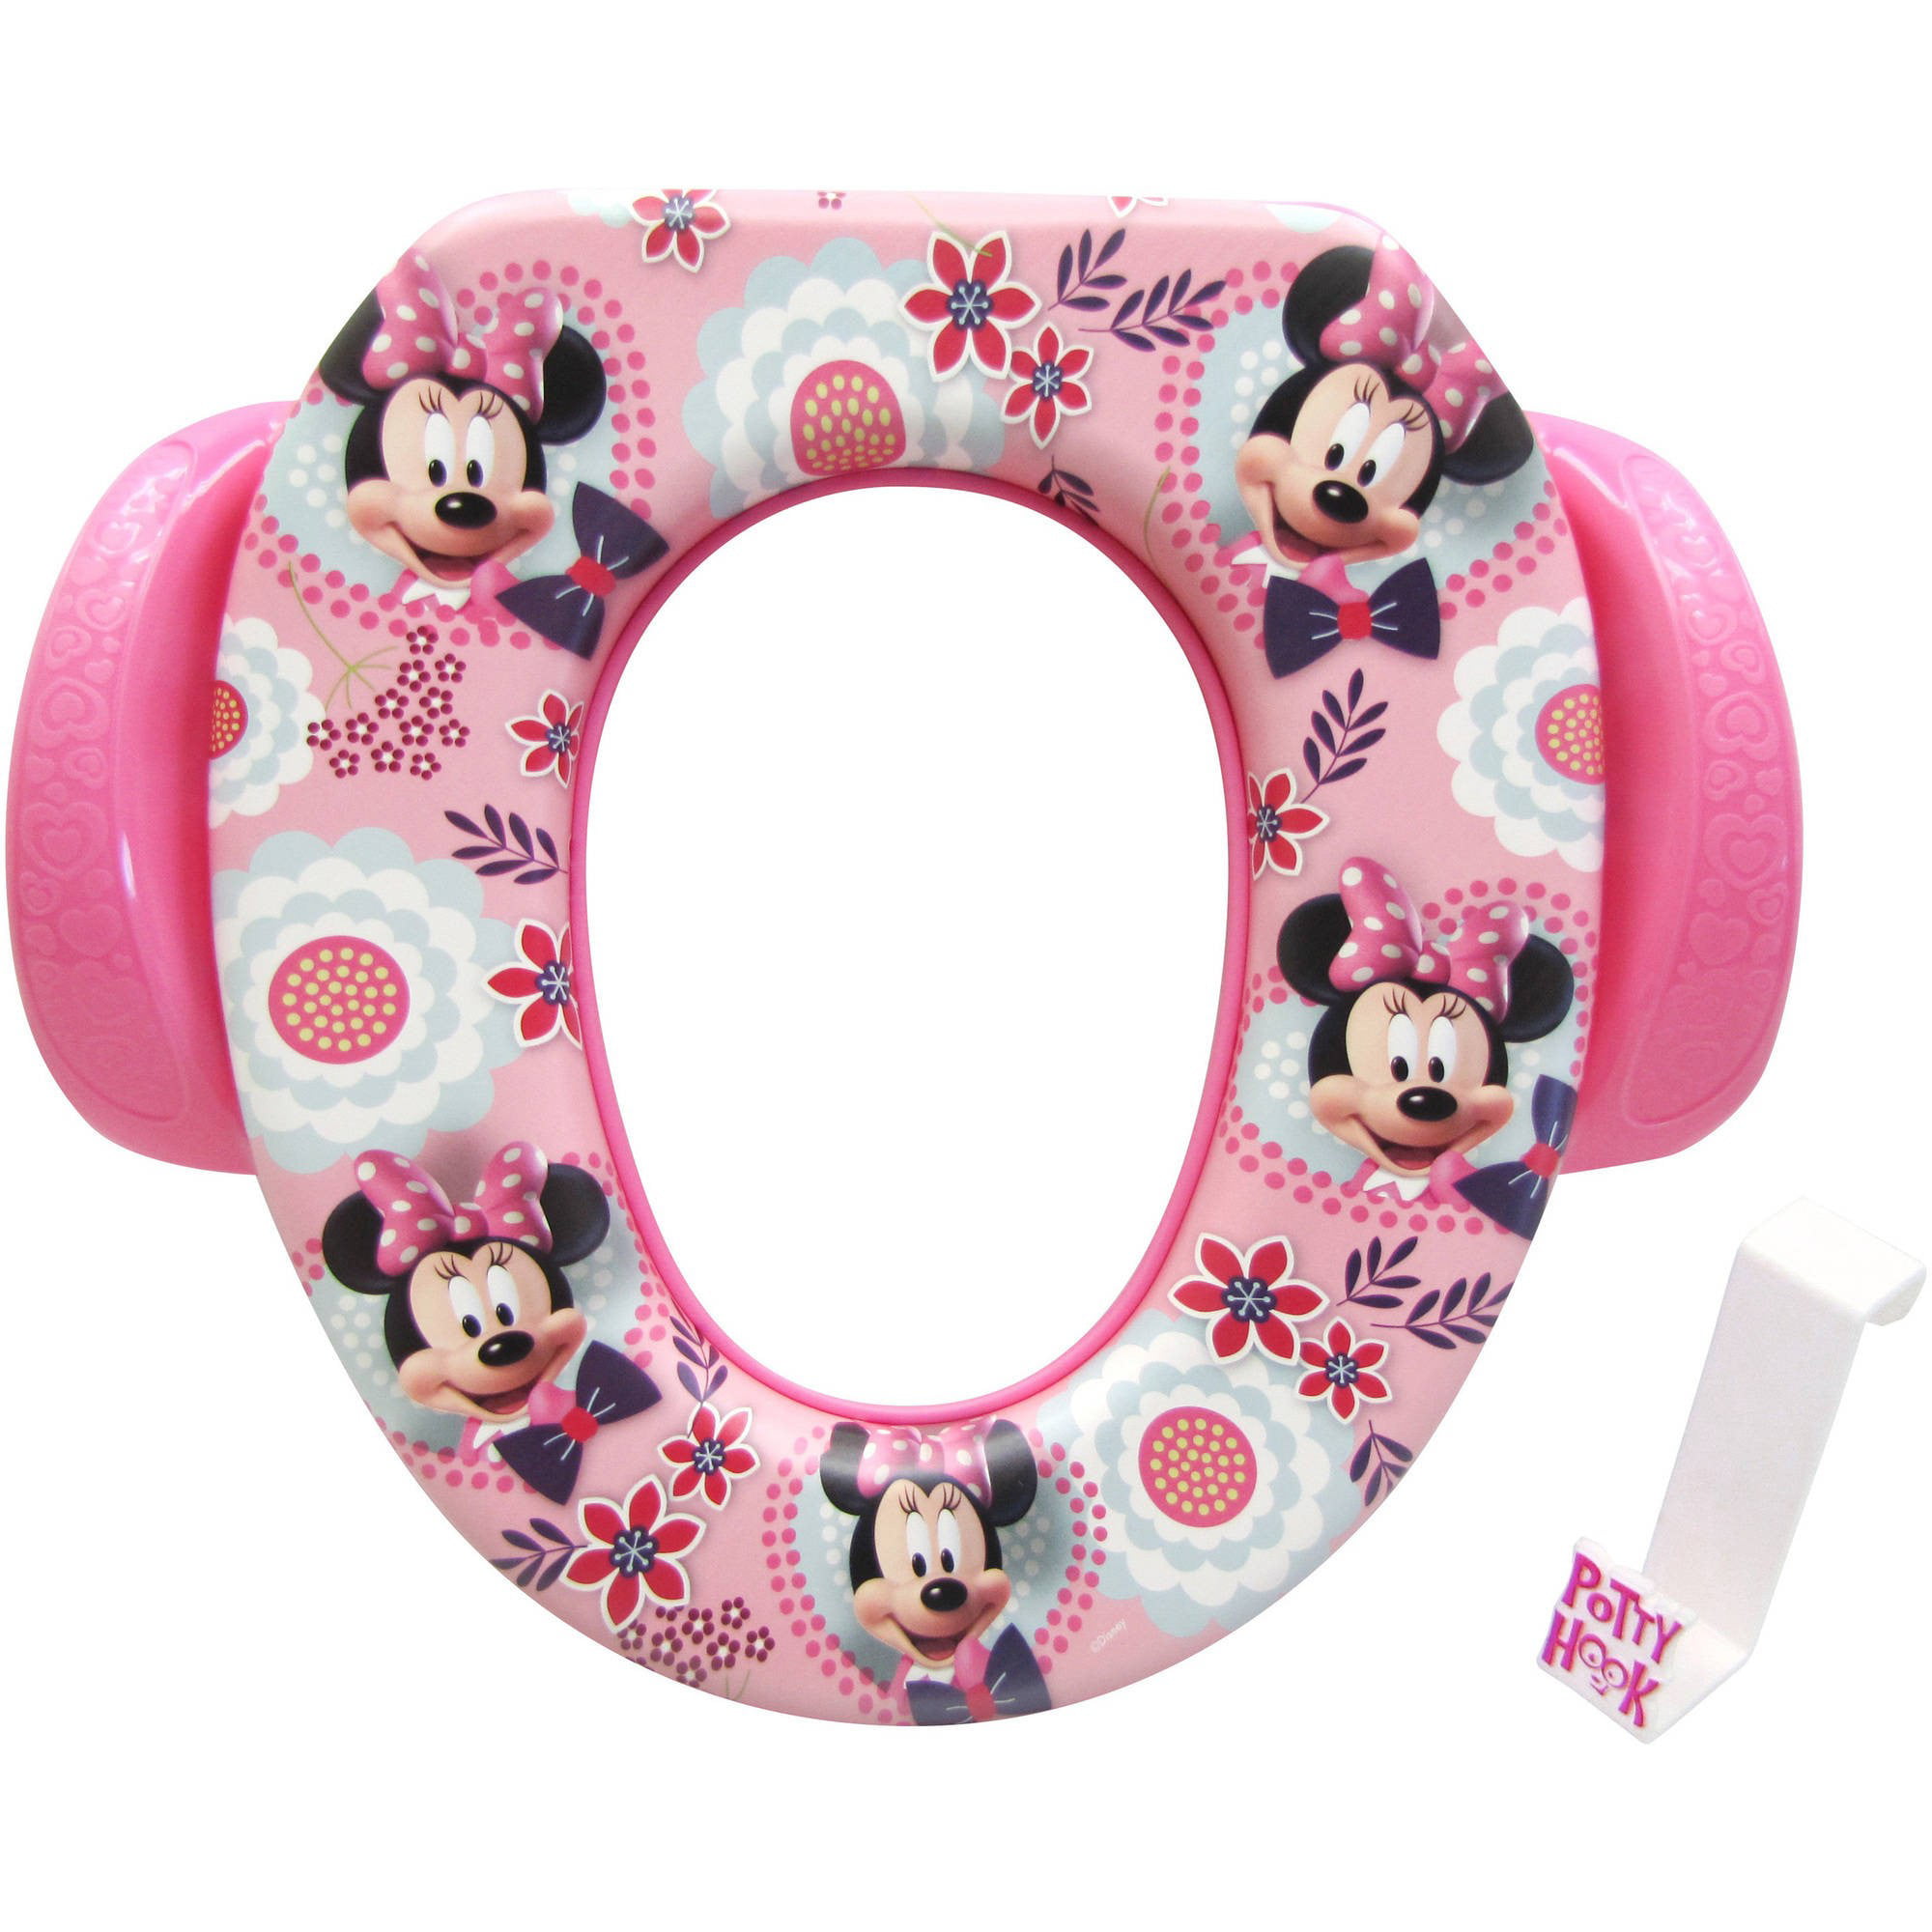 Disney Minnie Mouse "Simply Adorable" Soft Potty Seat with